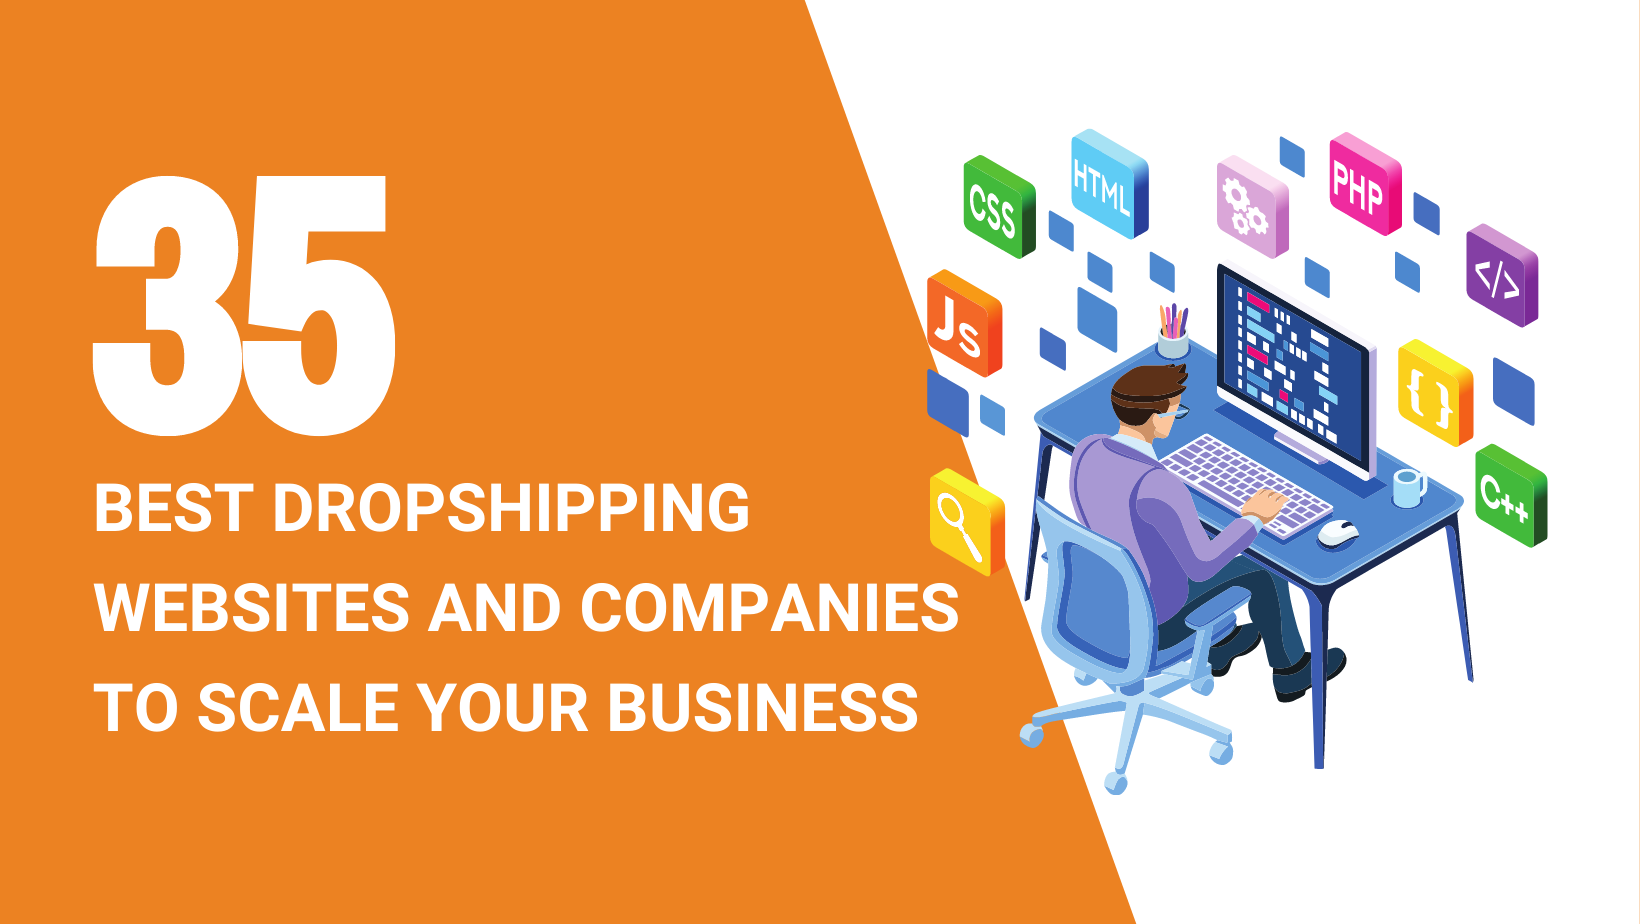 35 BEST DROPSHIPPING WEBSITES AND COMPANIES TO SCALE YOUR BUSINESS